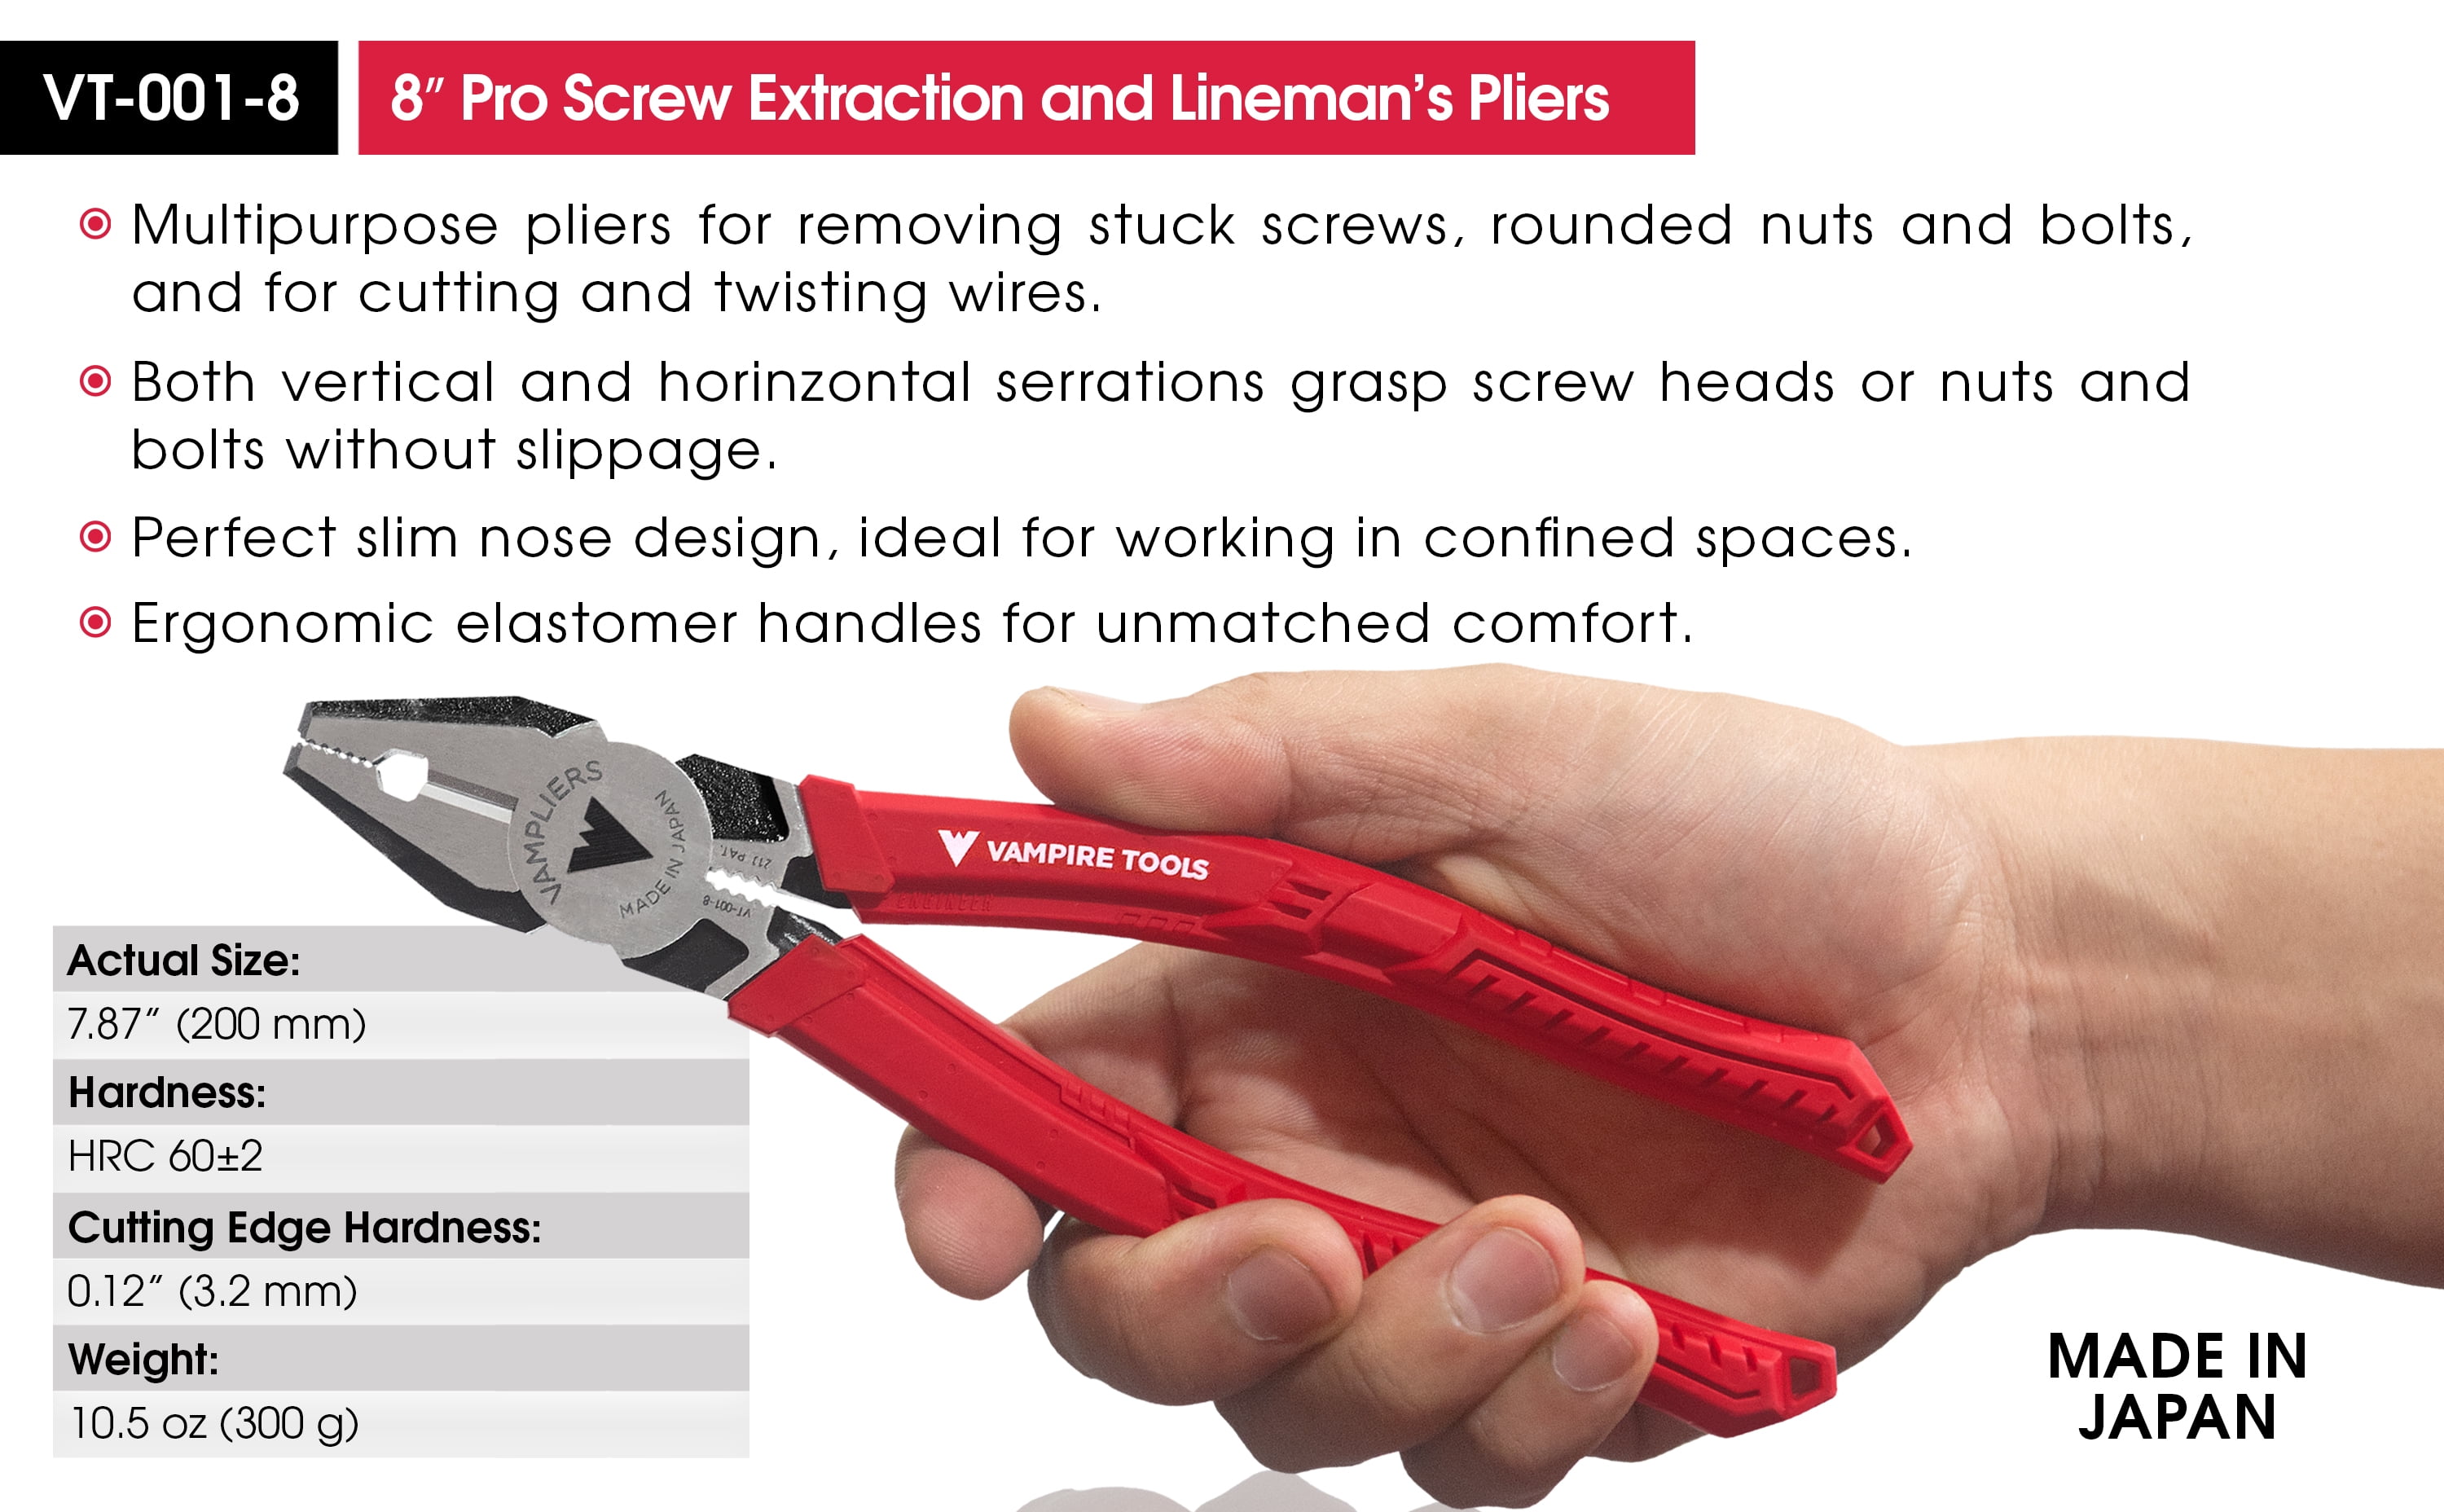 VAMPLIERS: 2-PC Specialty Screw Extraction Pliers Set. Includes 8